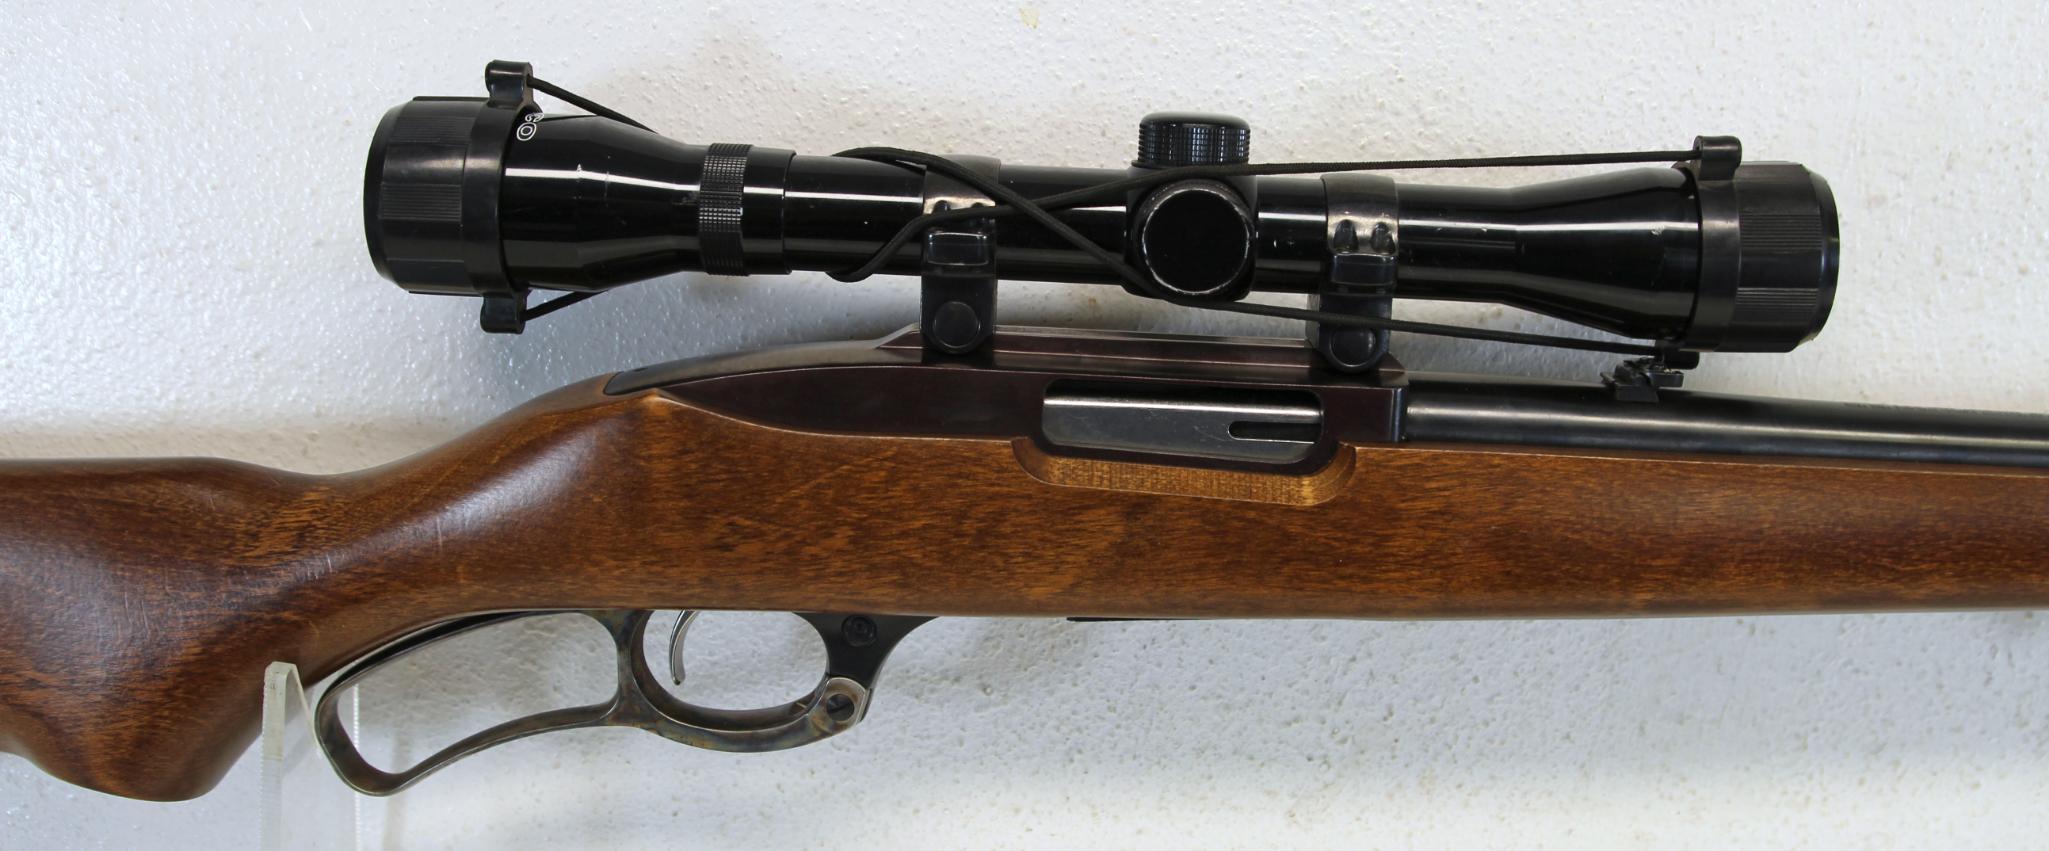 Ruger Model Ninety-Six .44 Rem Mag Lever Action Carbine Rifle w/Tasco 4x32 Scope 1 Extra Mag....